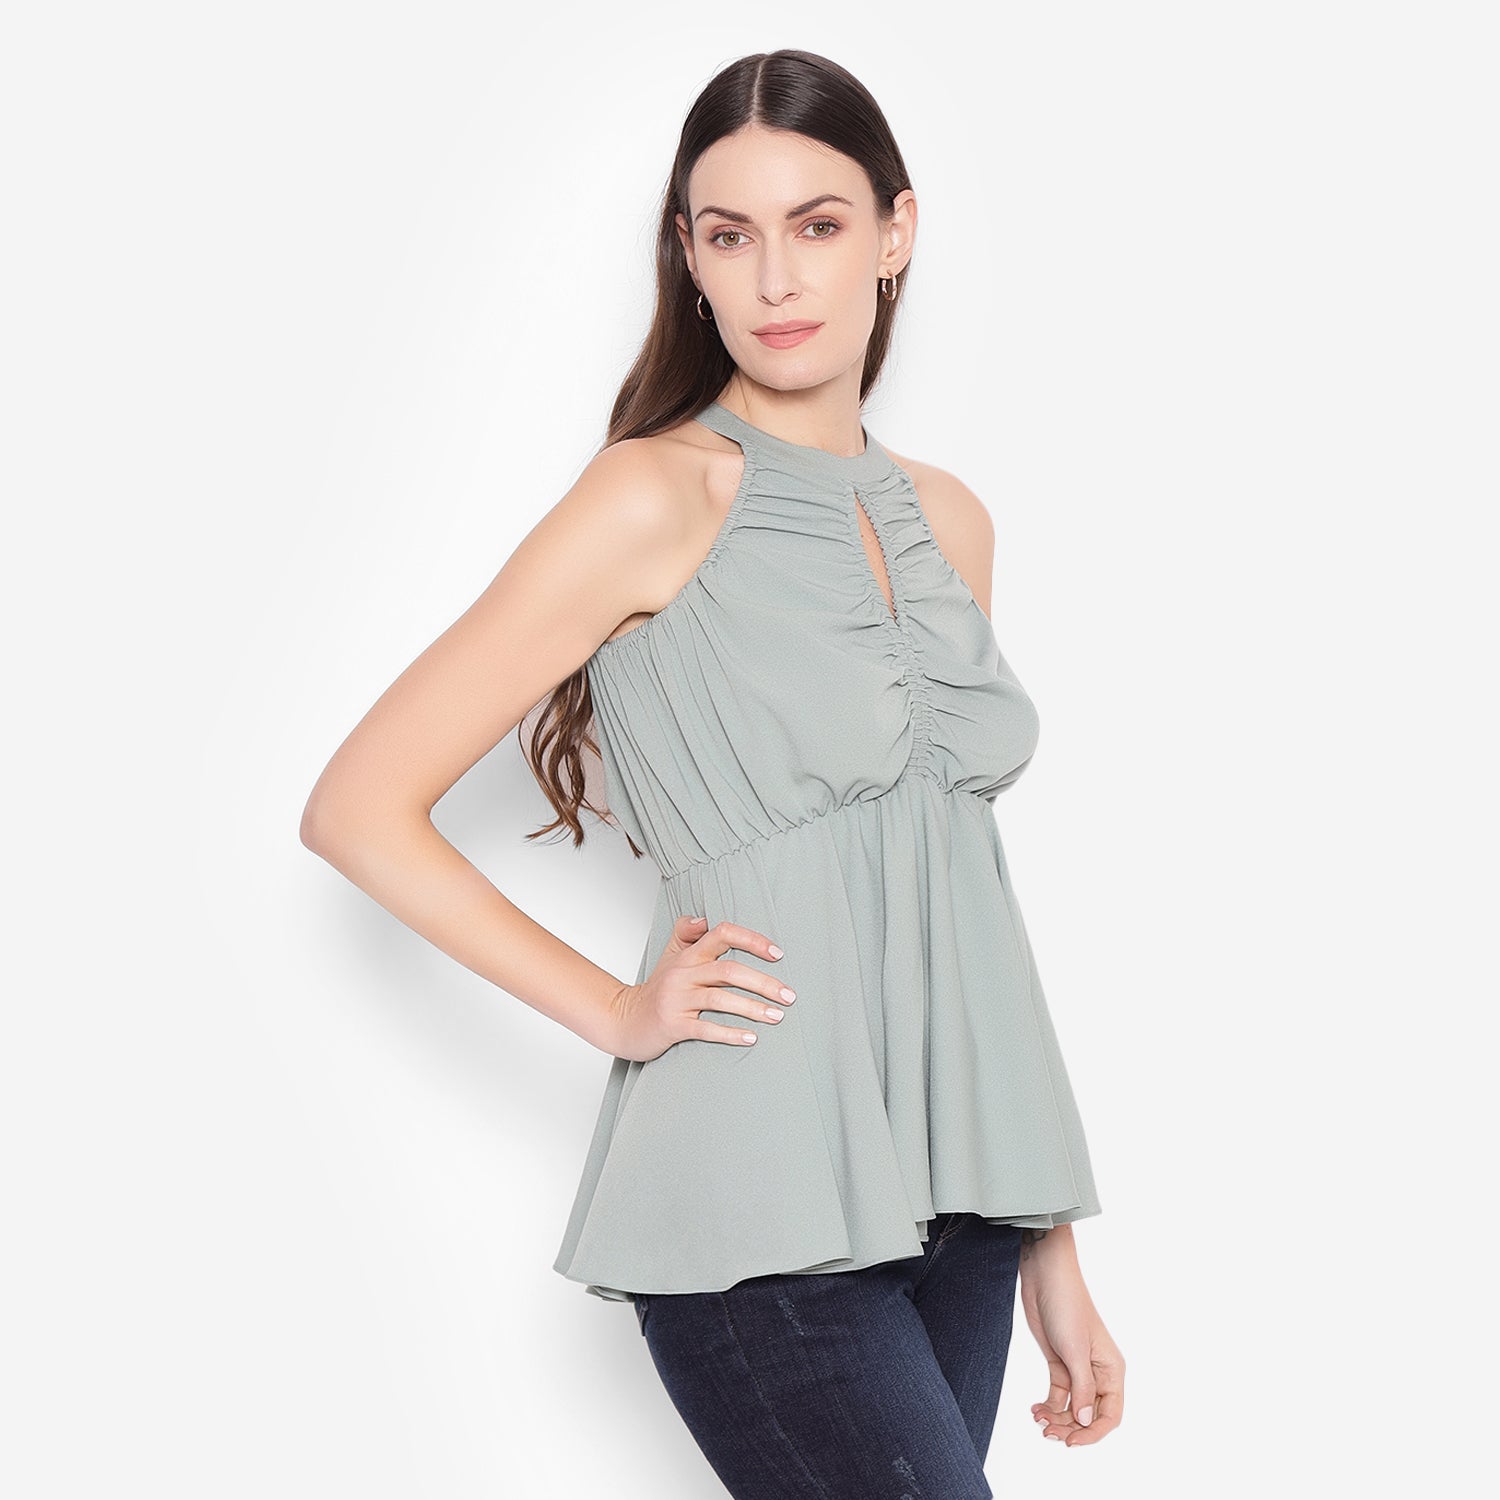 Gathered Top With Key Hole